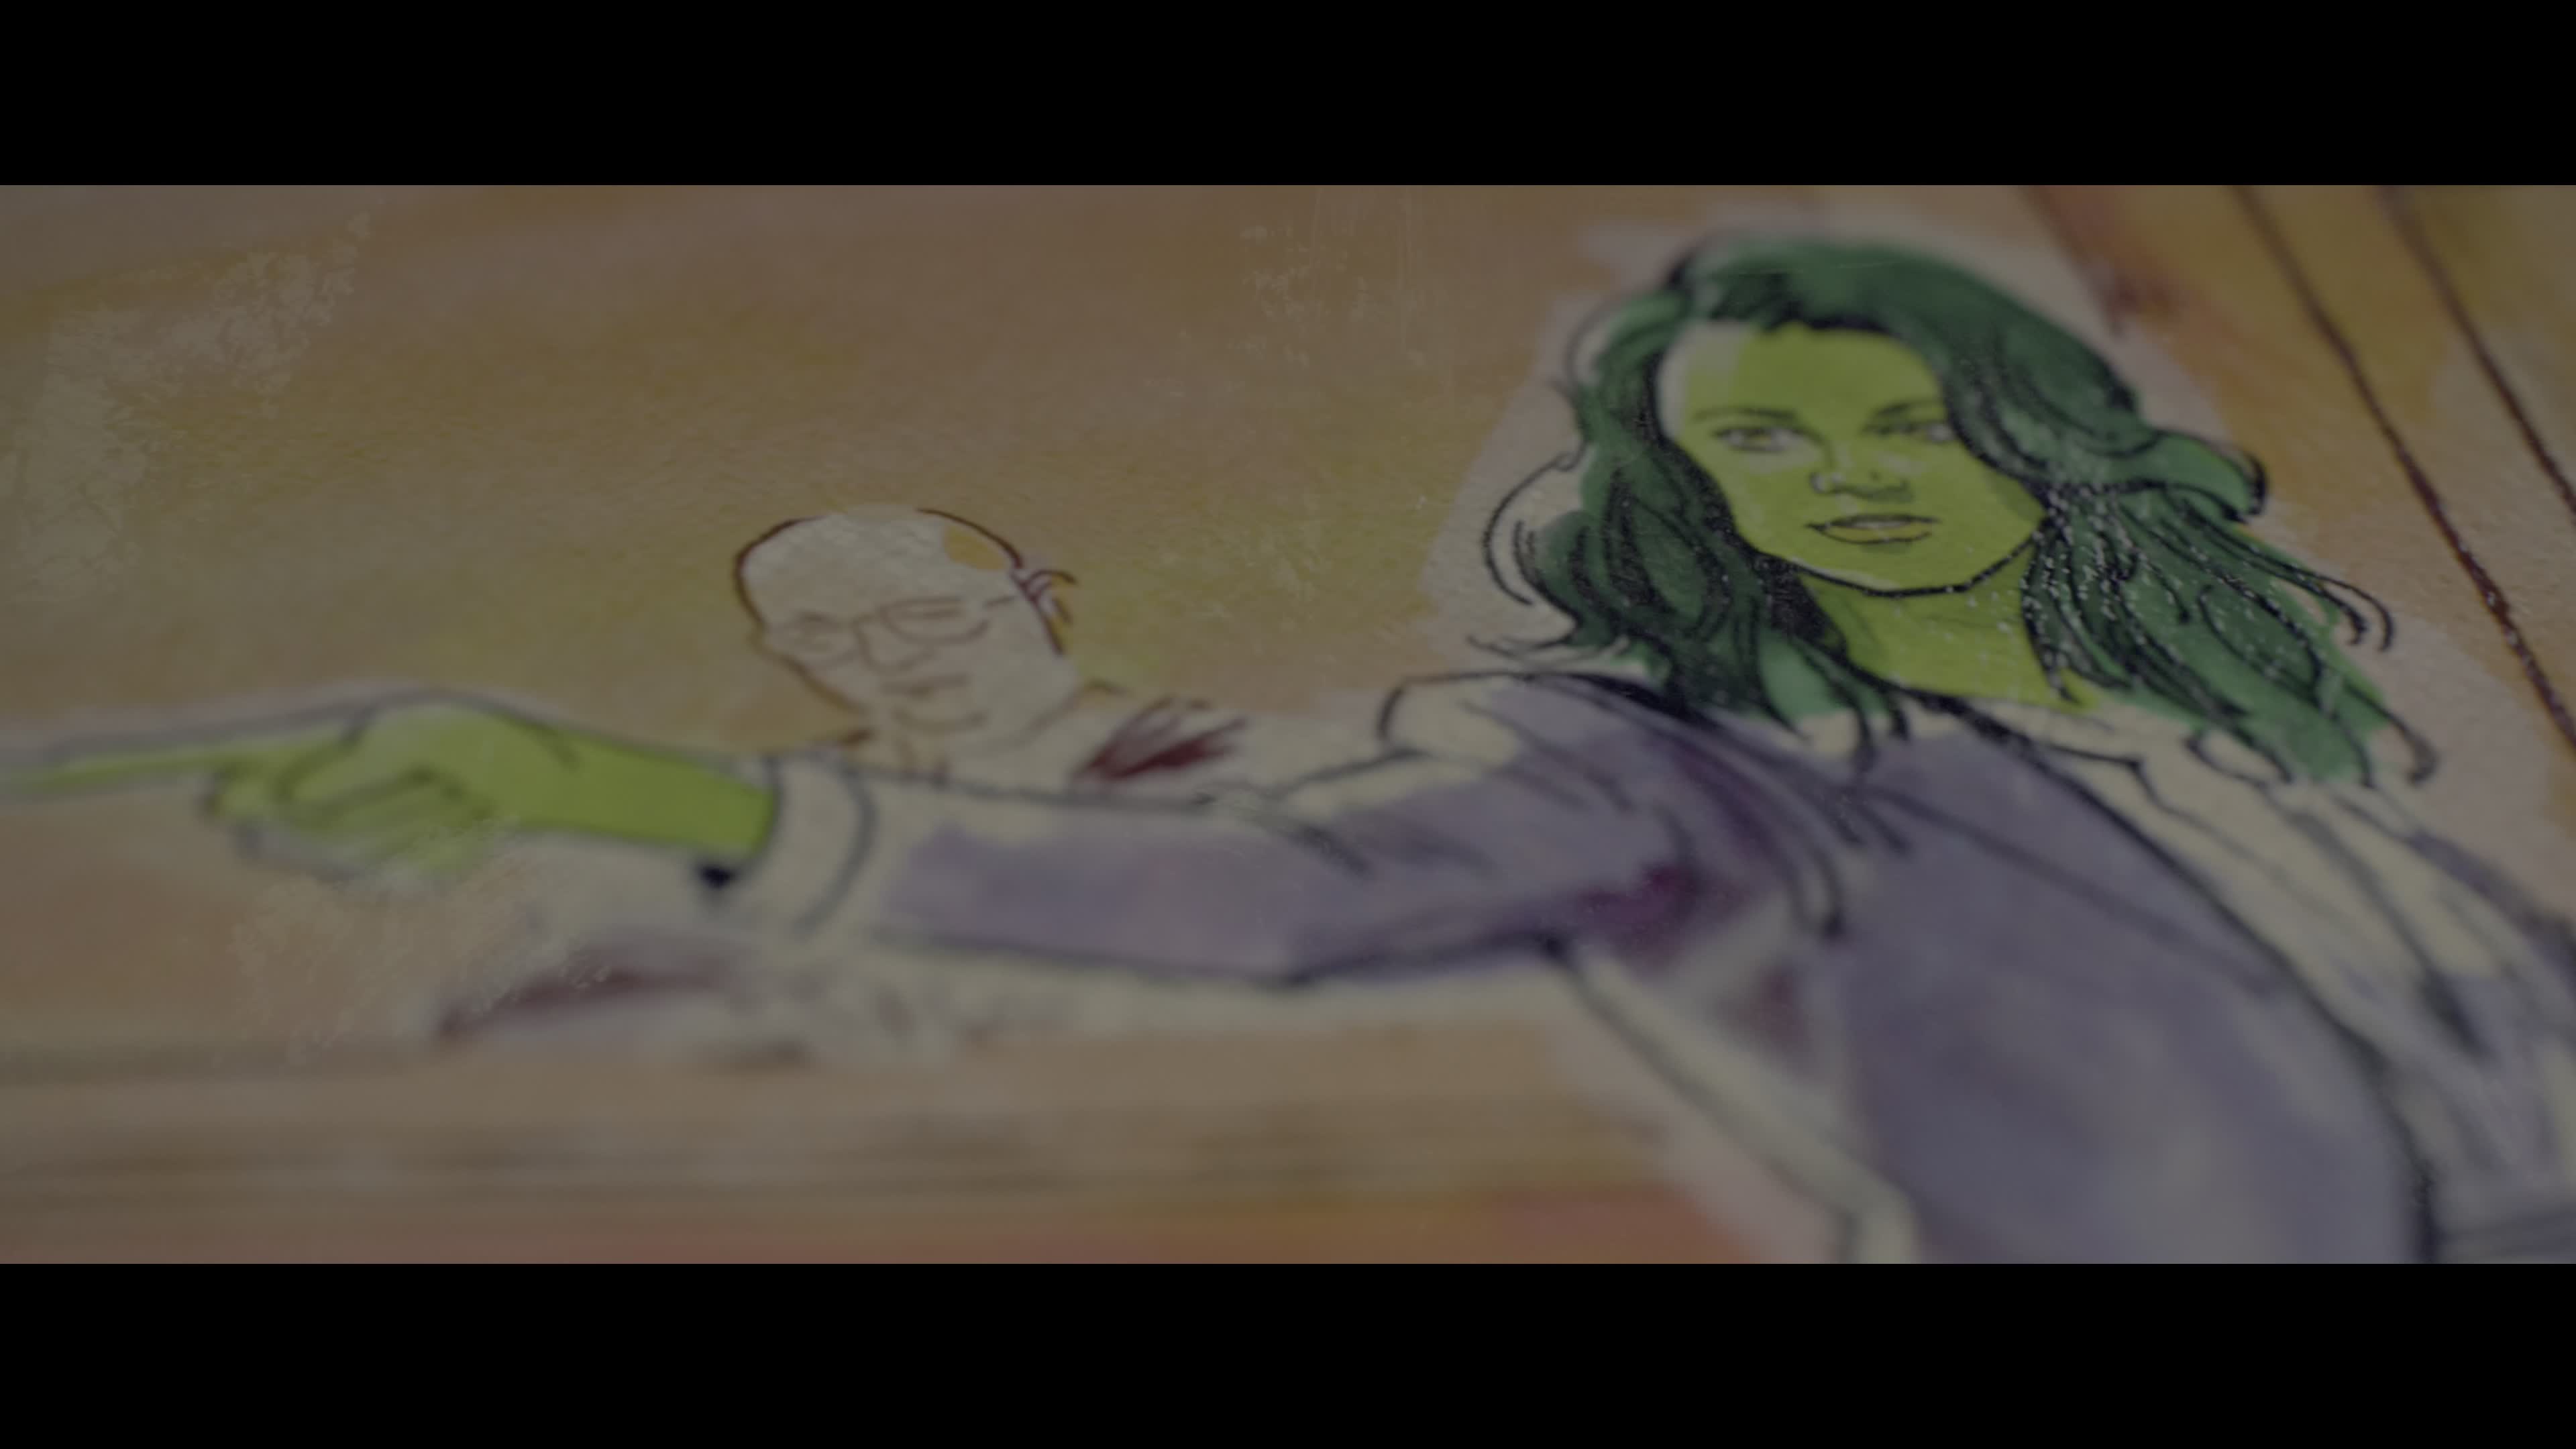 Loading Screenshot for She Hulk: Attorney at Law (2022)